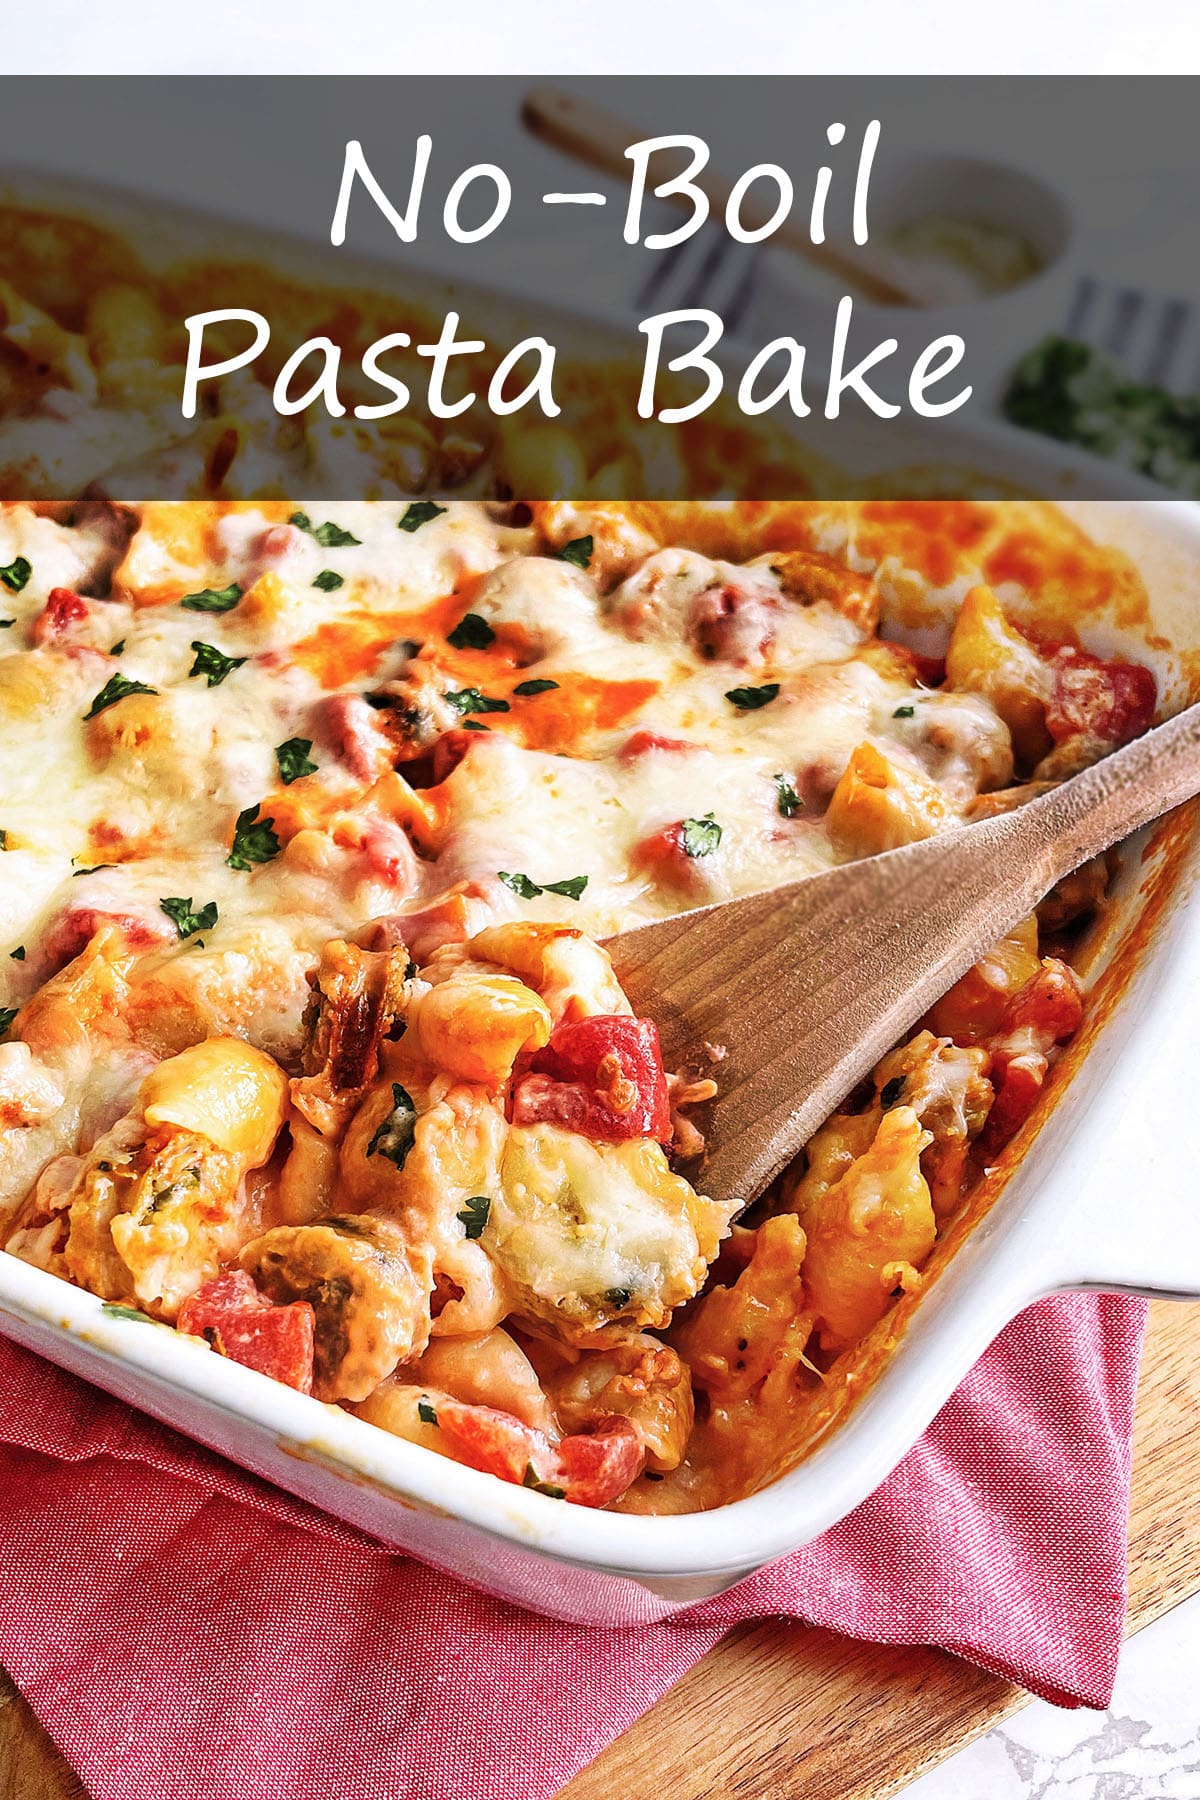 No-Boil Pasta Bake (Yes, It Really Works!)